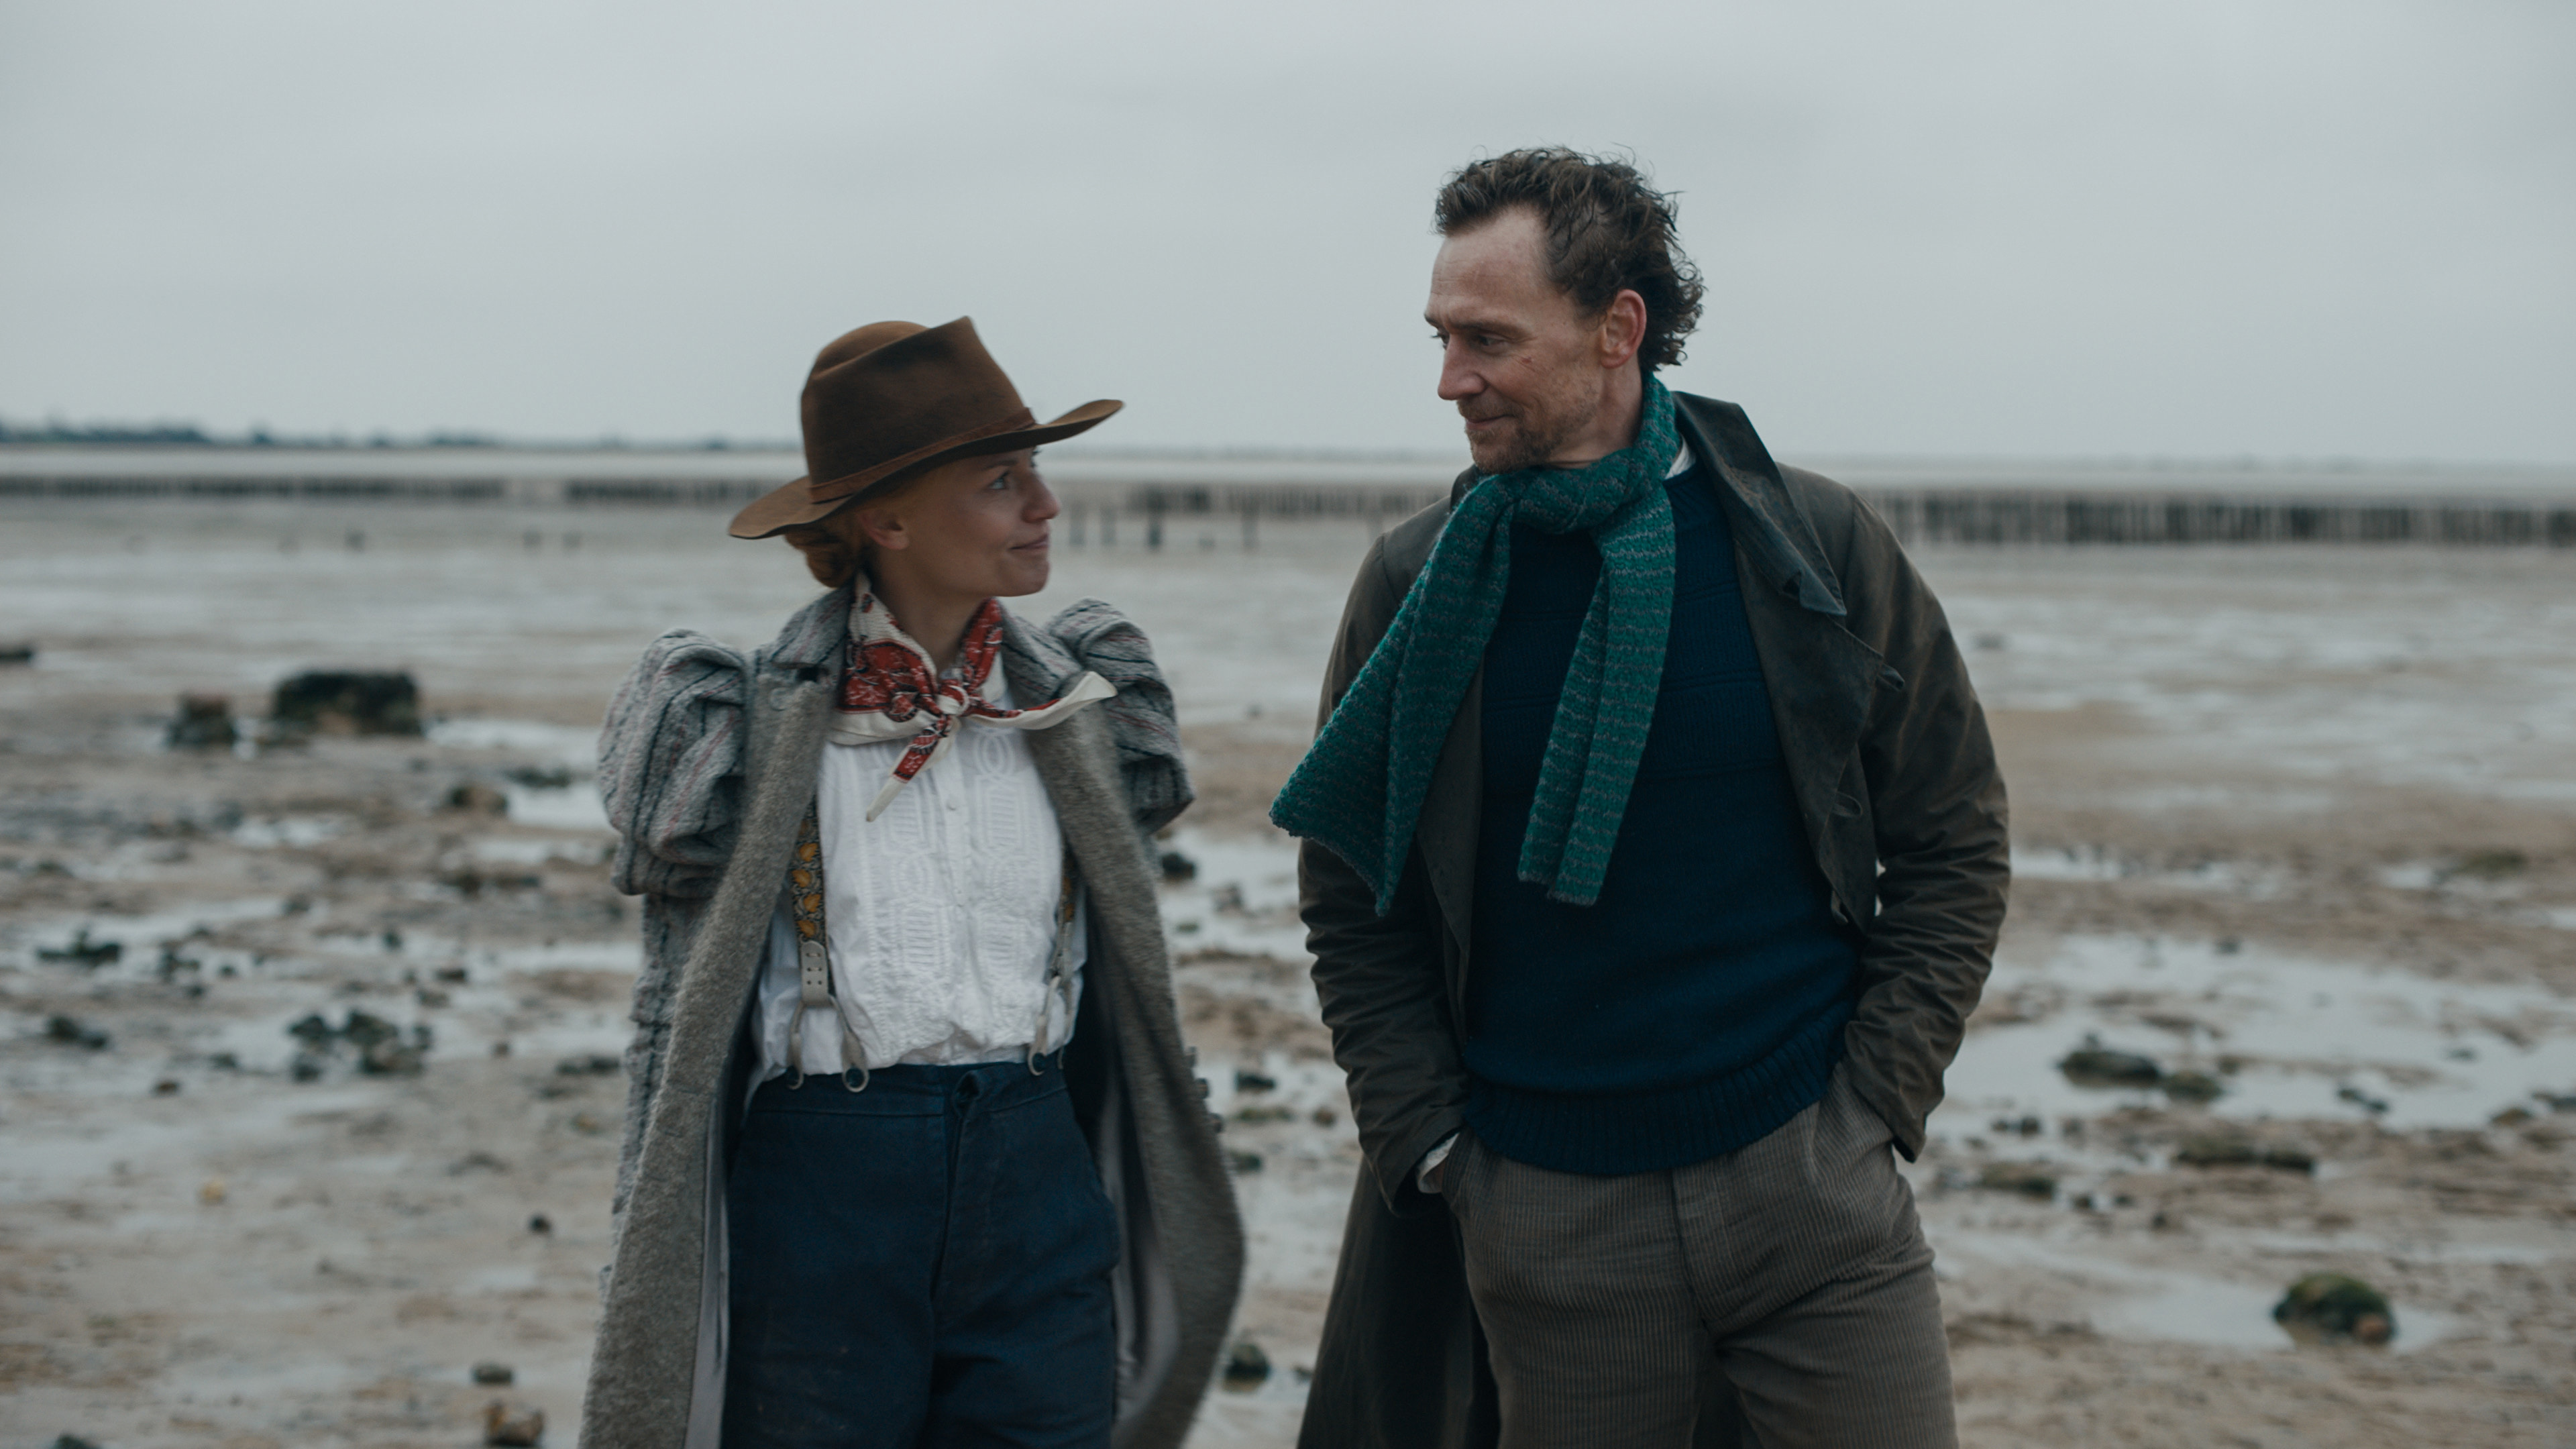 <p>On the 2022 Apple TV+ series "The Essex Serpent," Tom Hiddleston starred as a Victorian vicar drawn into a charged relationship with <a href="https://www.wonderwall.com/celebrity/profiles/overview/claire-danes-263.article">Claire Danes</a>'s amateur scientist who's investigating reports of a mythical serpent haunting the marshes of Essex, England. The limited series, which is based on Sarah Perry's book of the same name, ran for six episodes.</p>